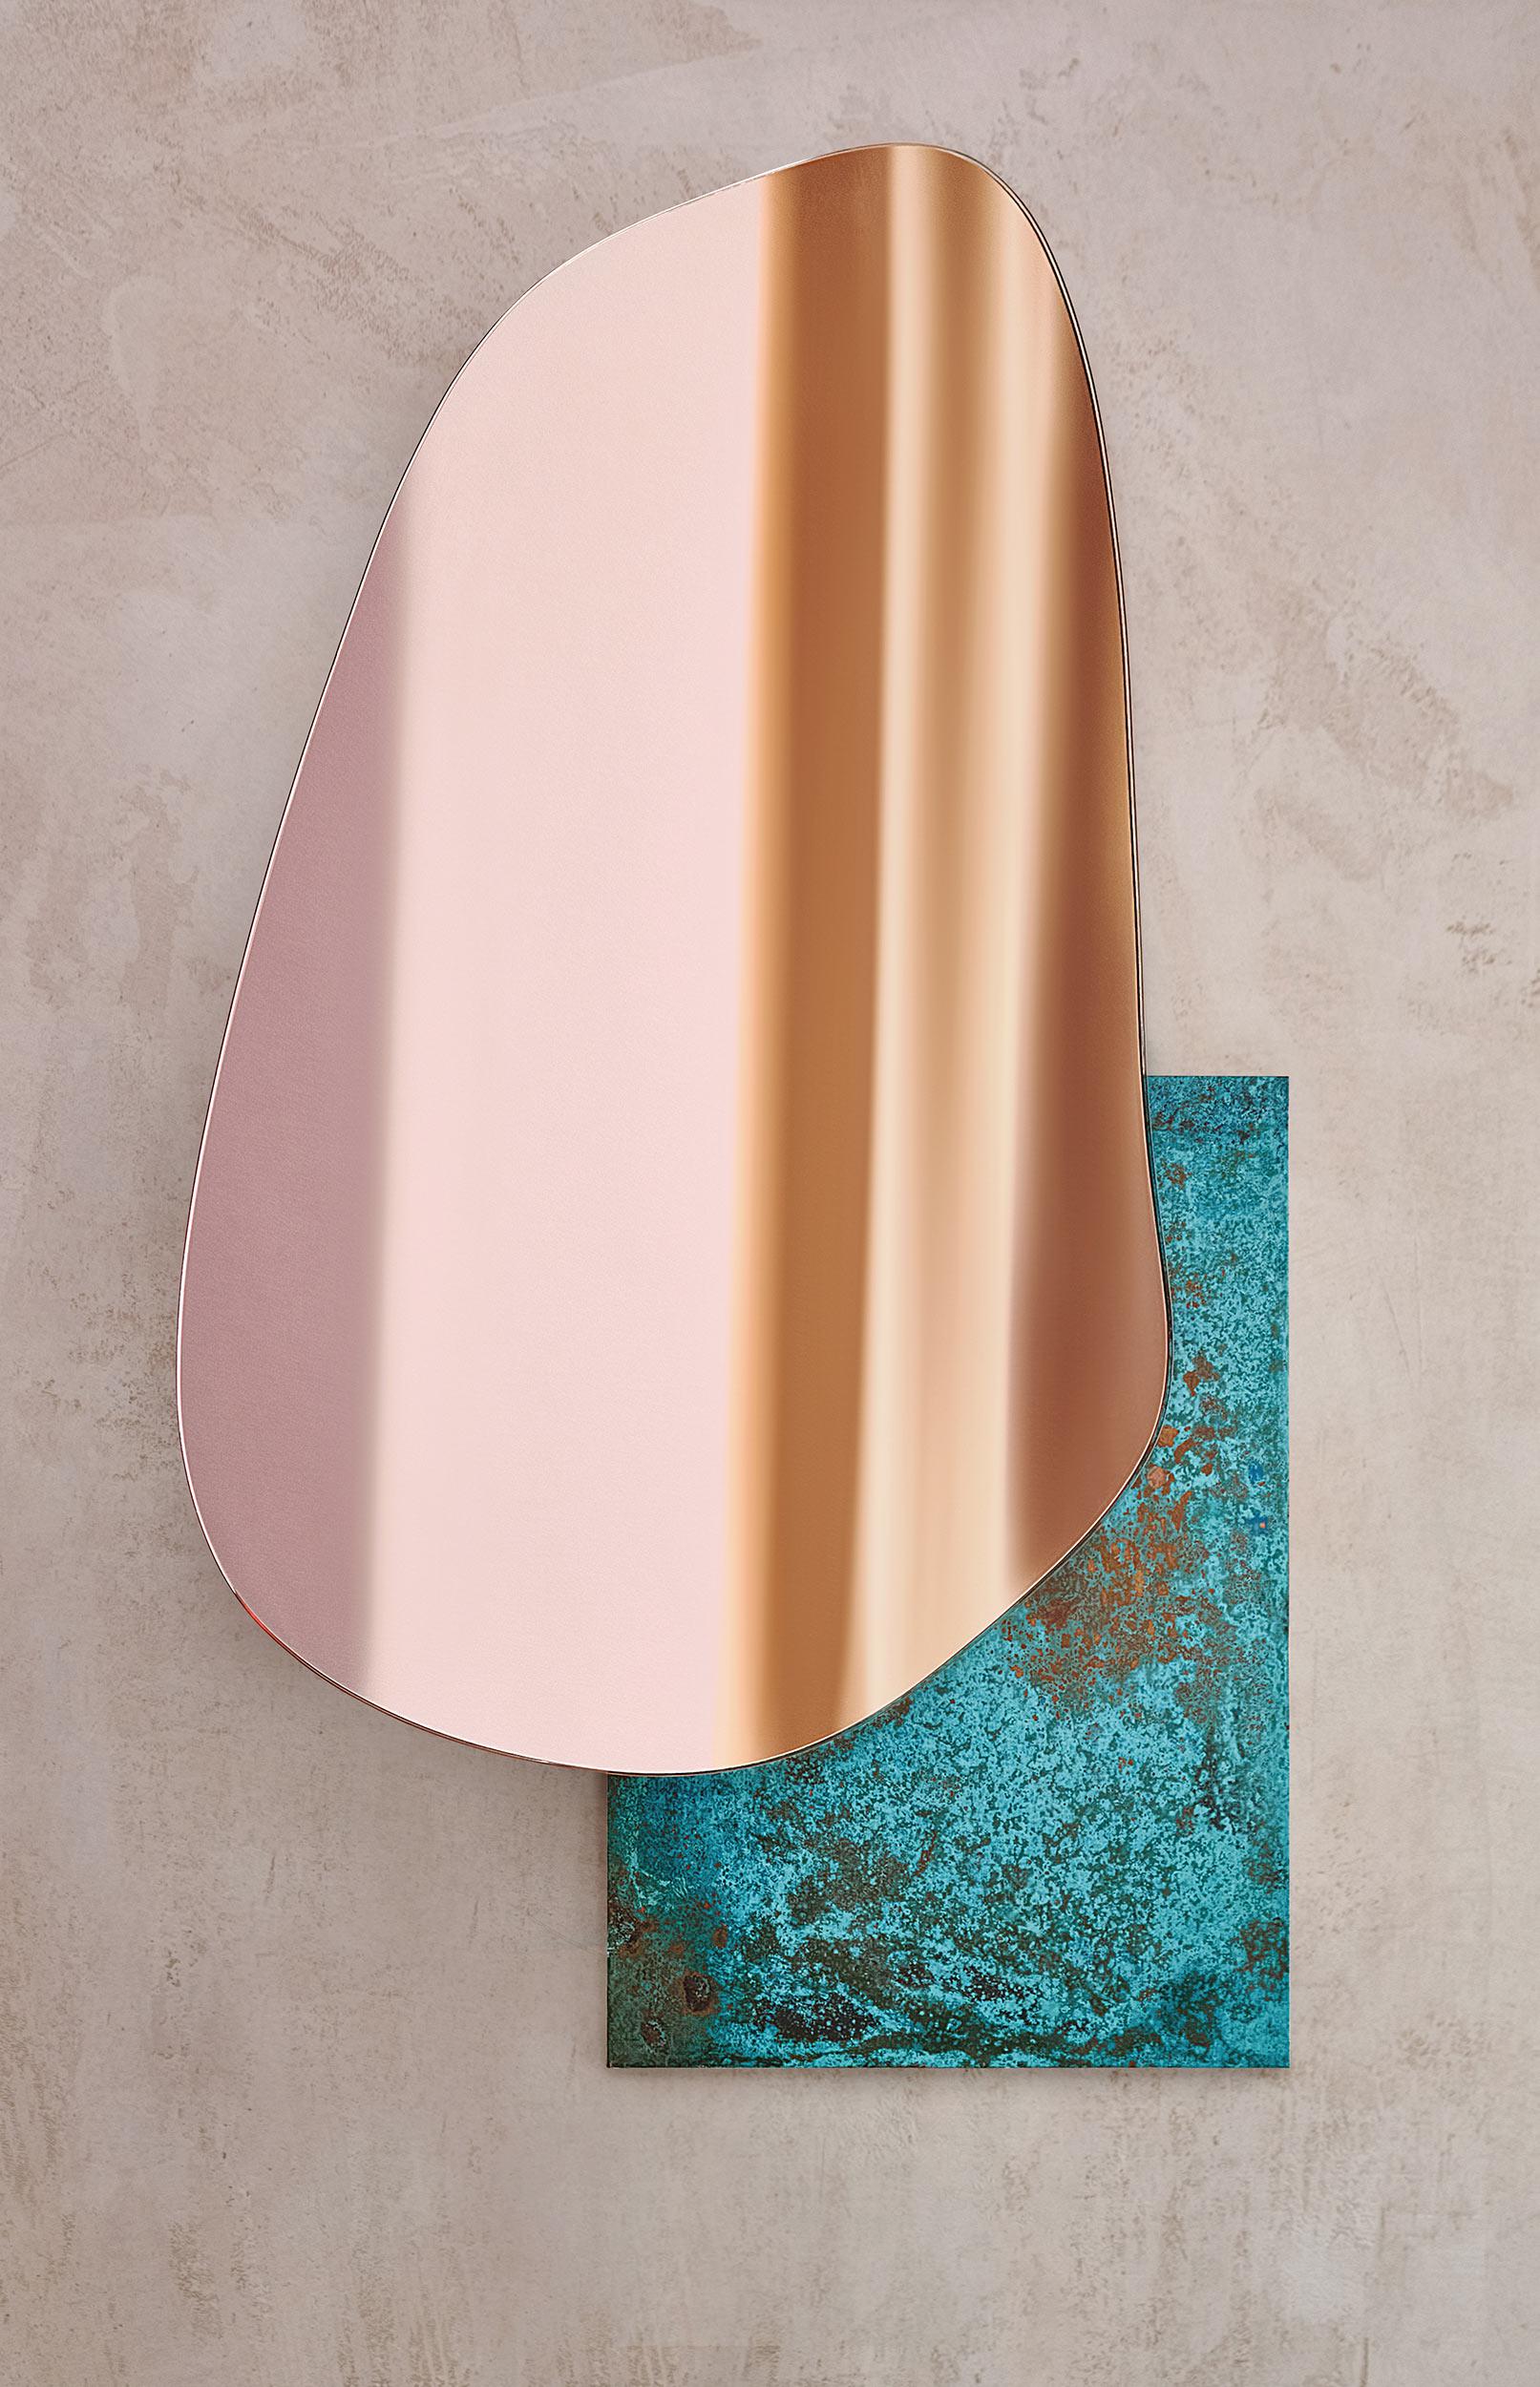 Modern Lake Wall Mirror by Noom
Designers: Maryna Dague & Nathan Baraness

Model shown in picture:
Number 3 
Base in oxidized copper and copper tint mirror

